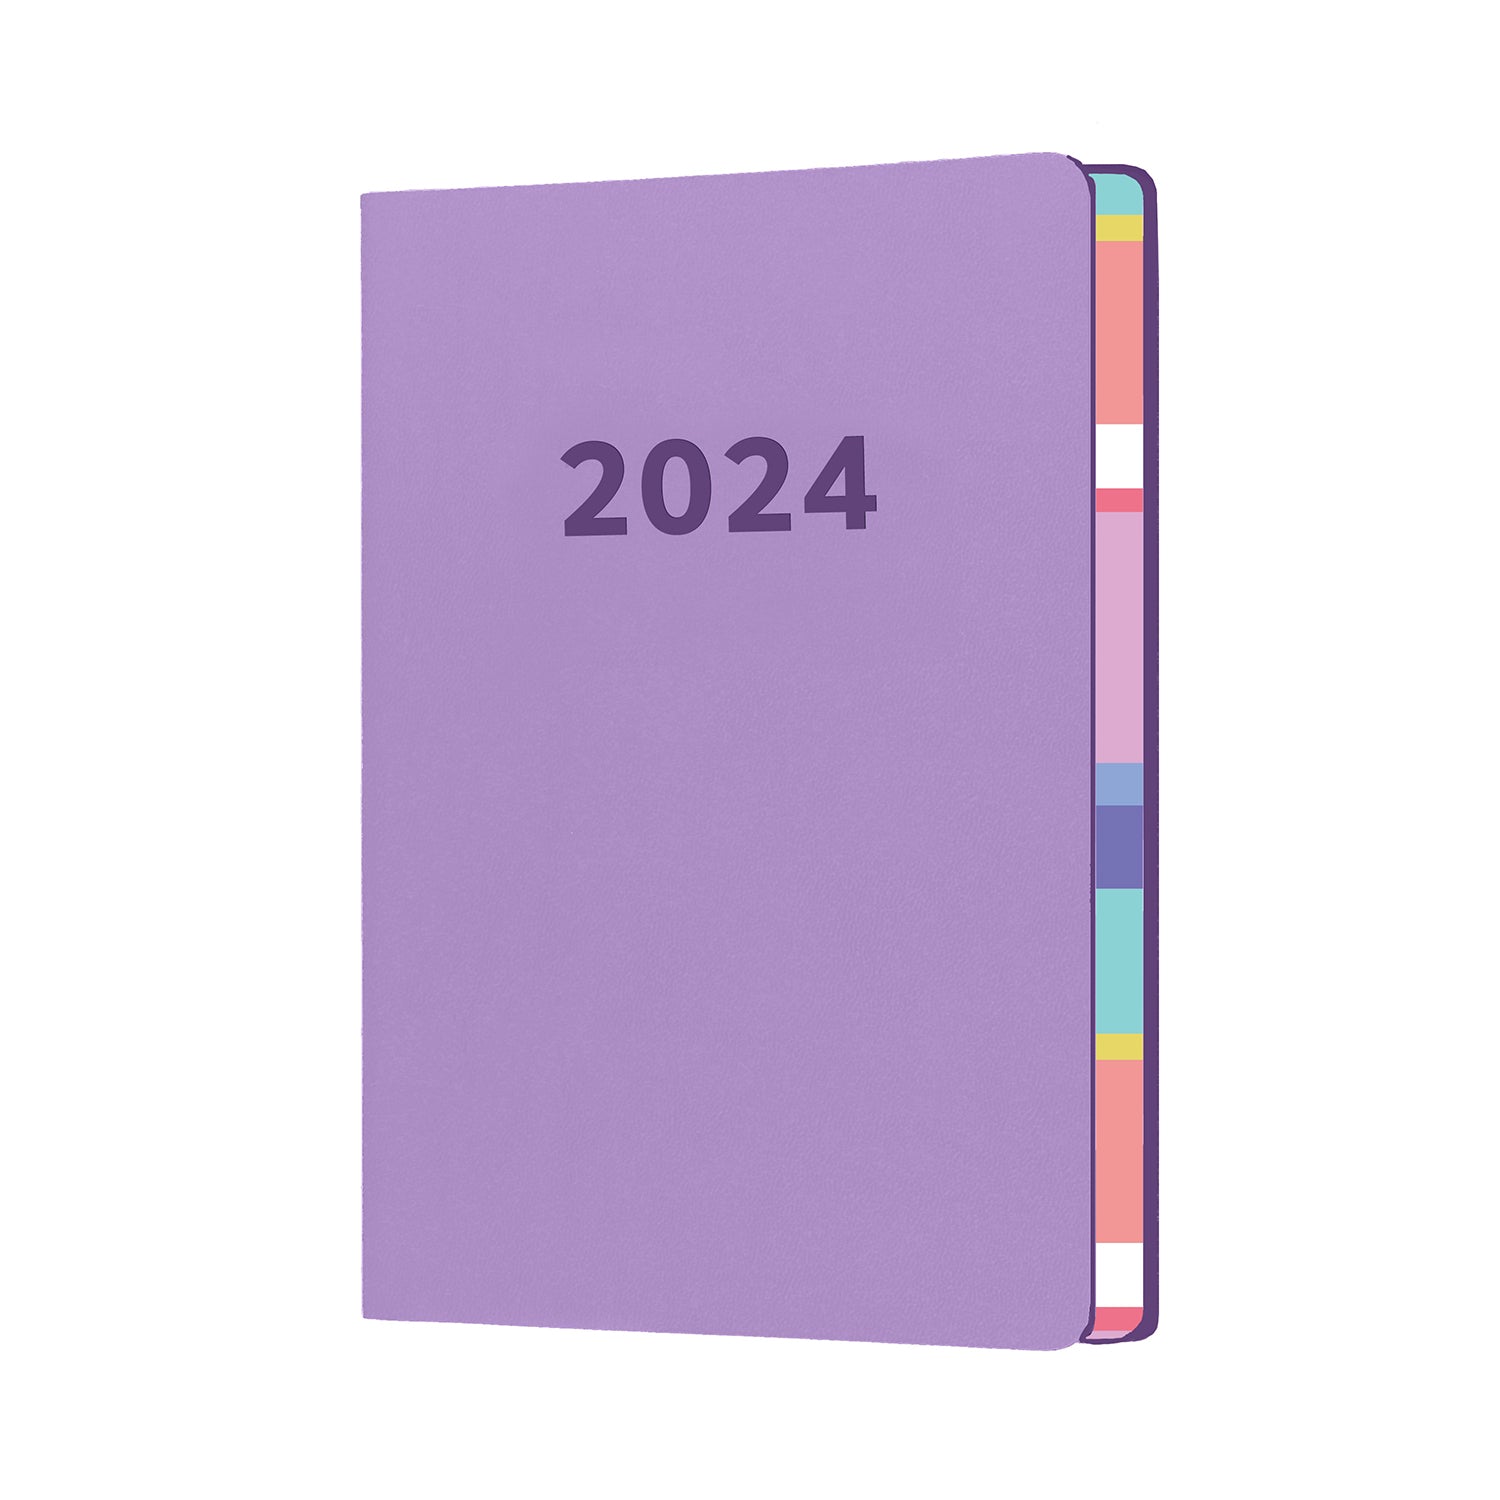 2024 Edge Mira Lilac - Weekly Diary/Planner